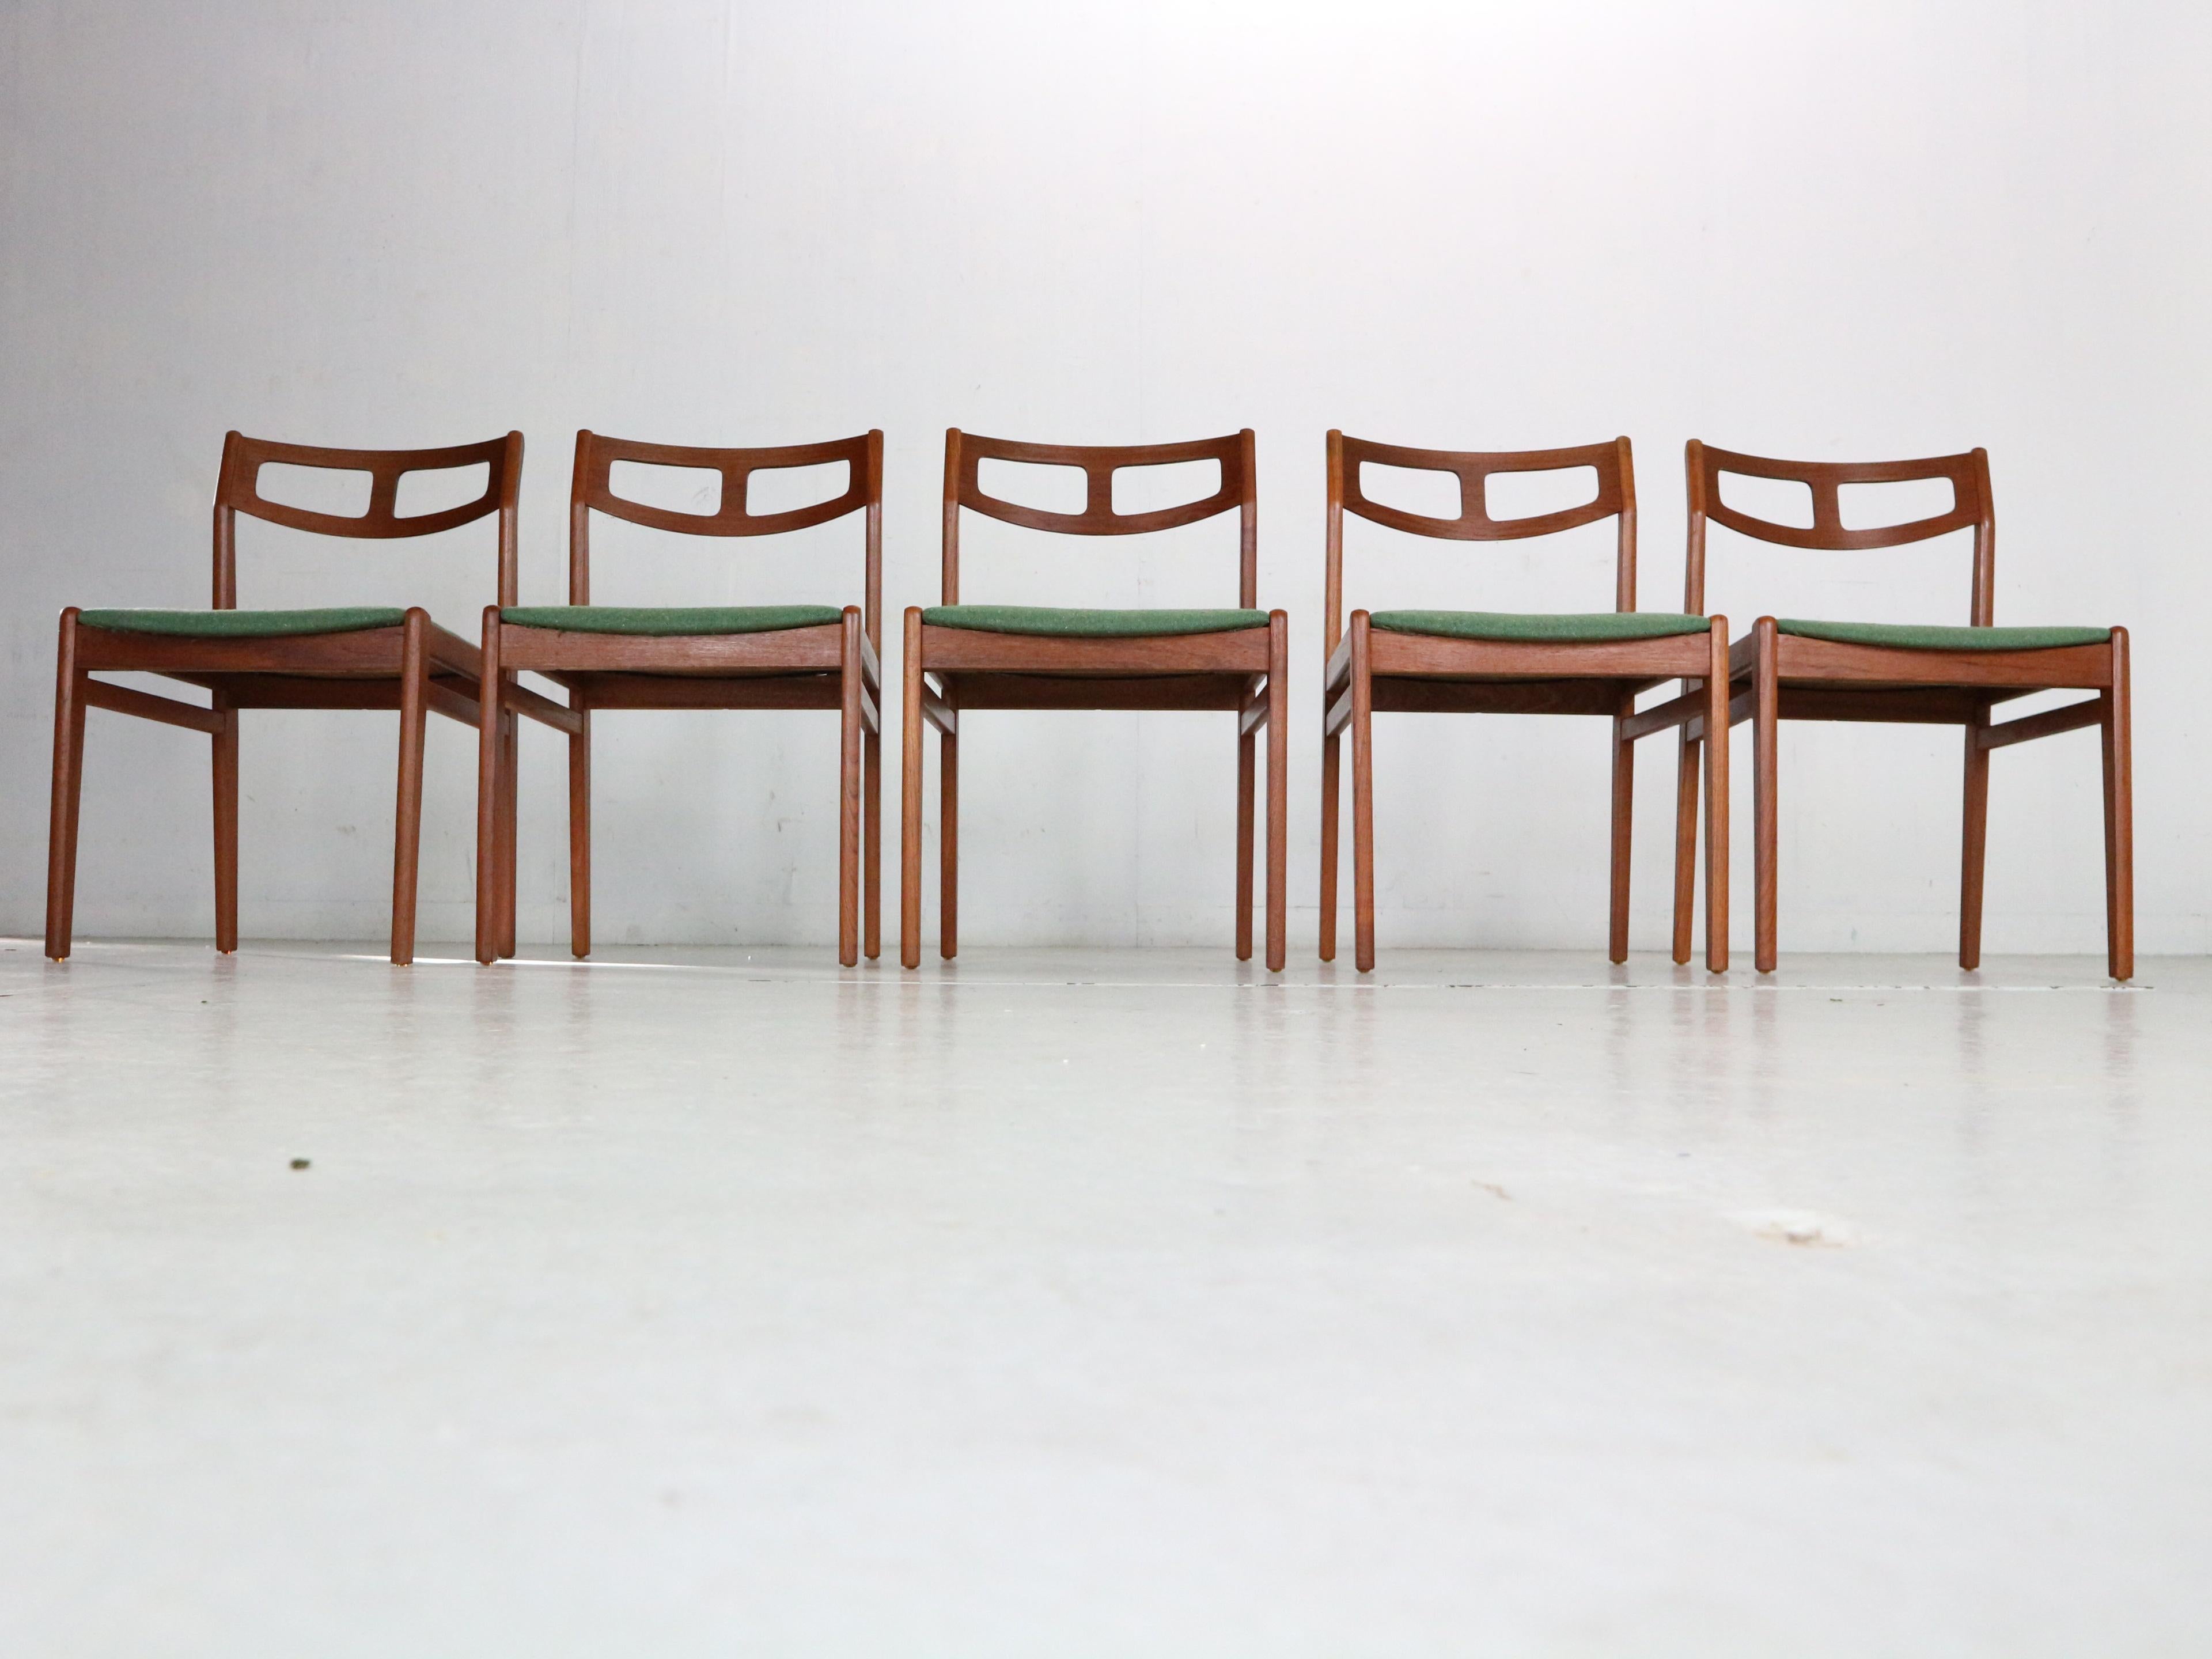 Mid-20th Century Scandinavian Modern Set of 5 Teak& Green New Upholstery Dinning Room Chairs For Sale